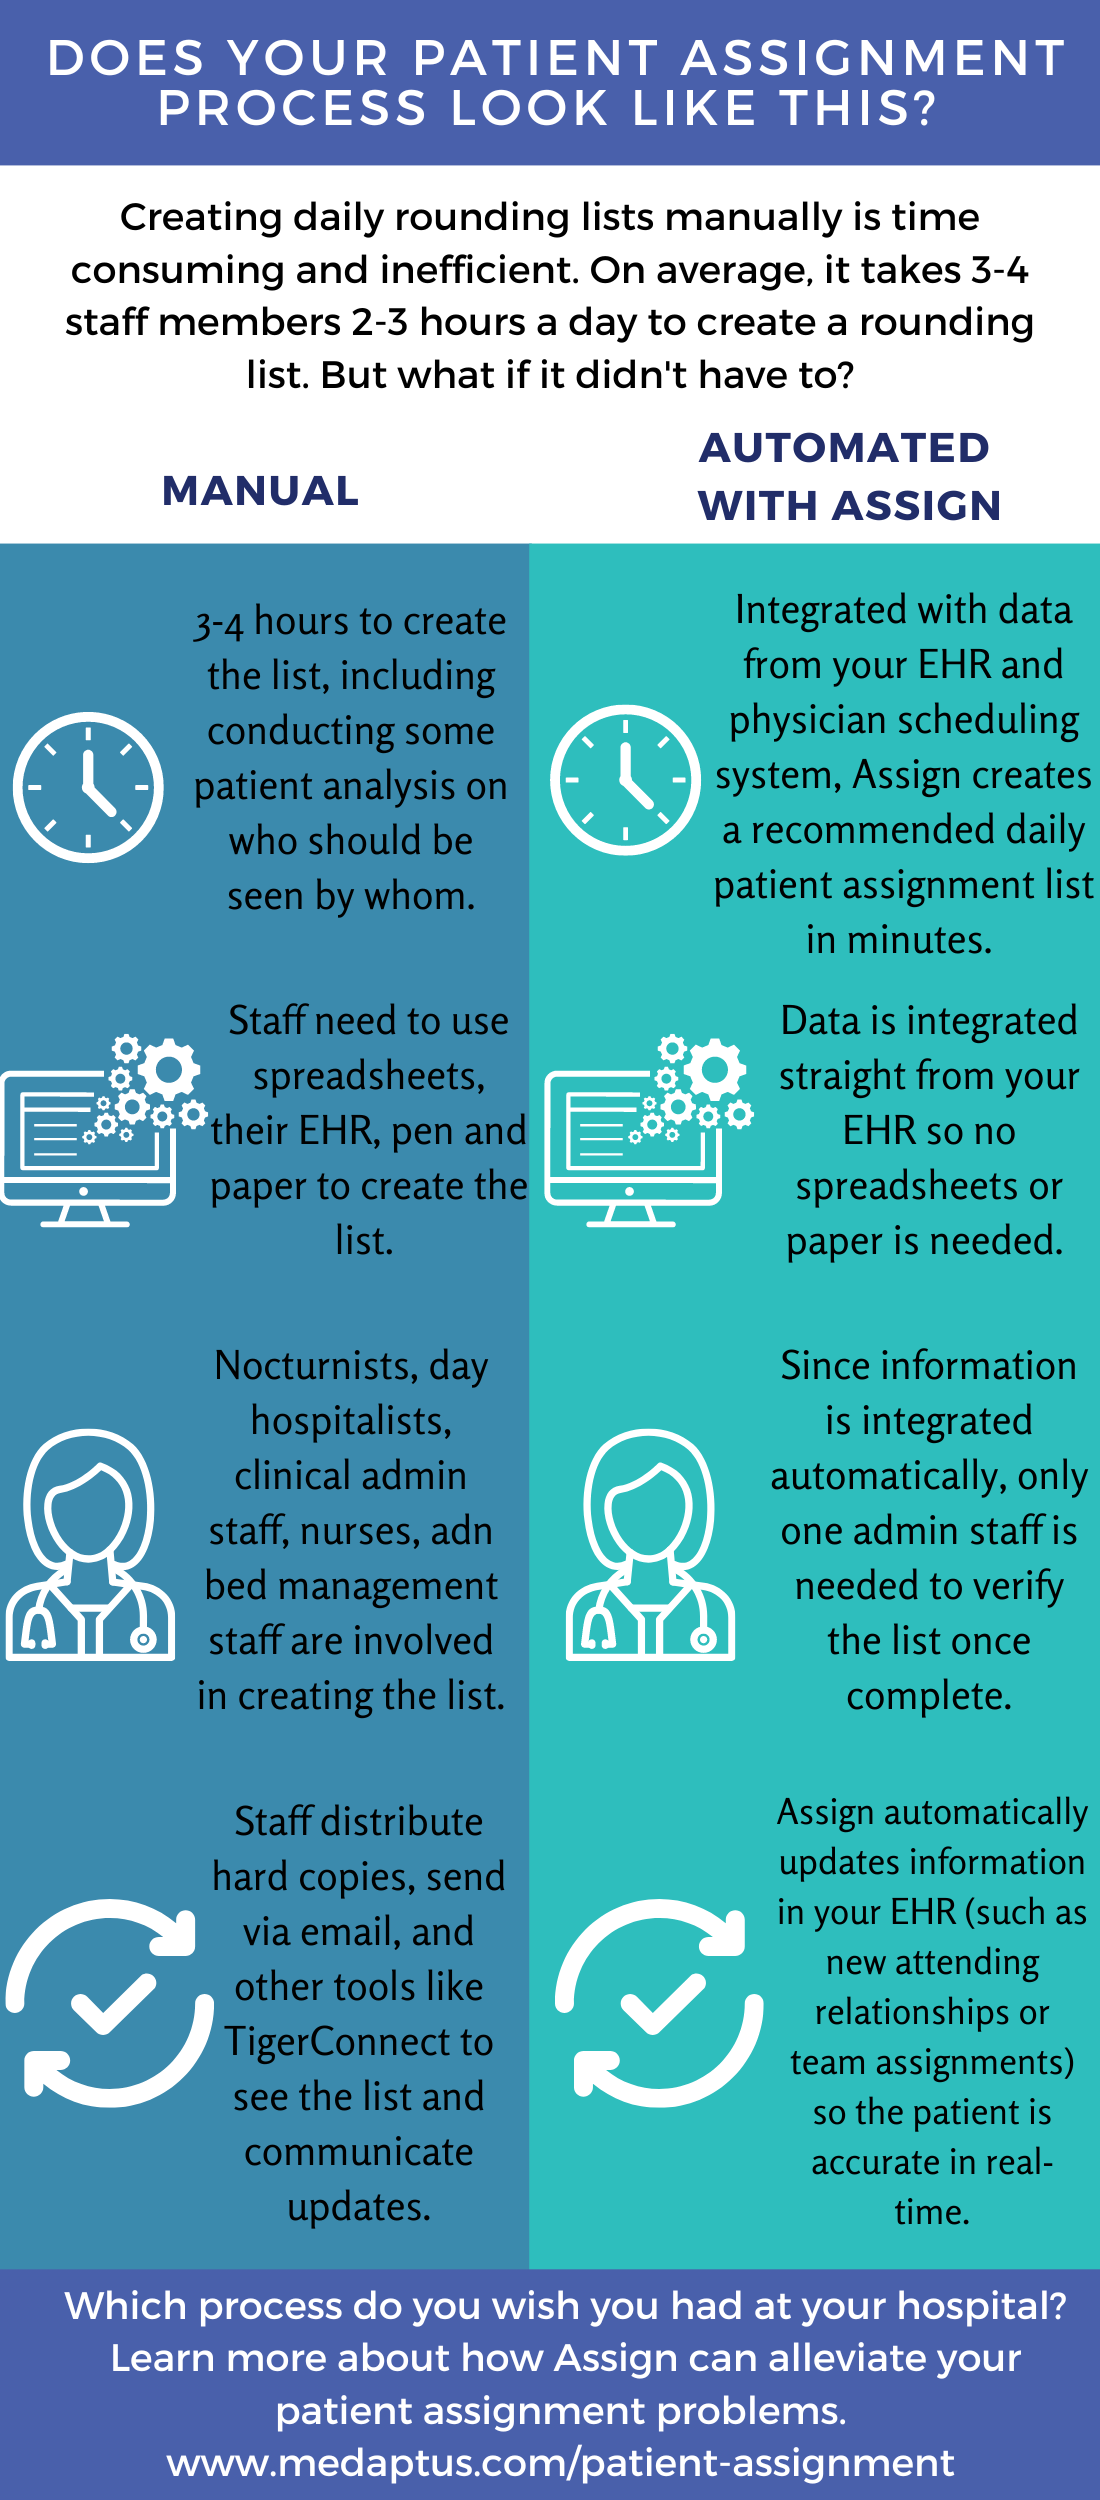 Manual vs Automated Assignment Process